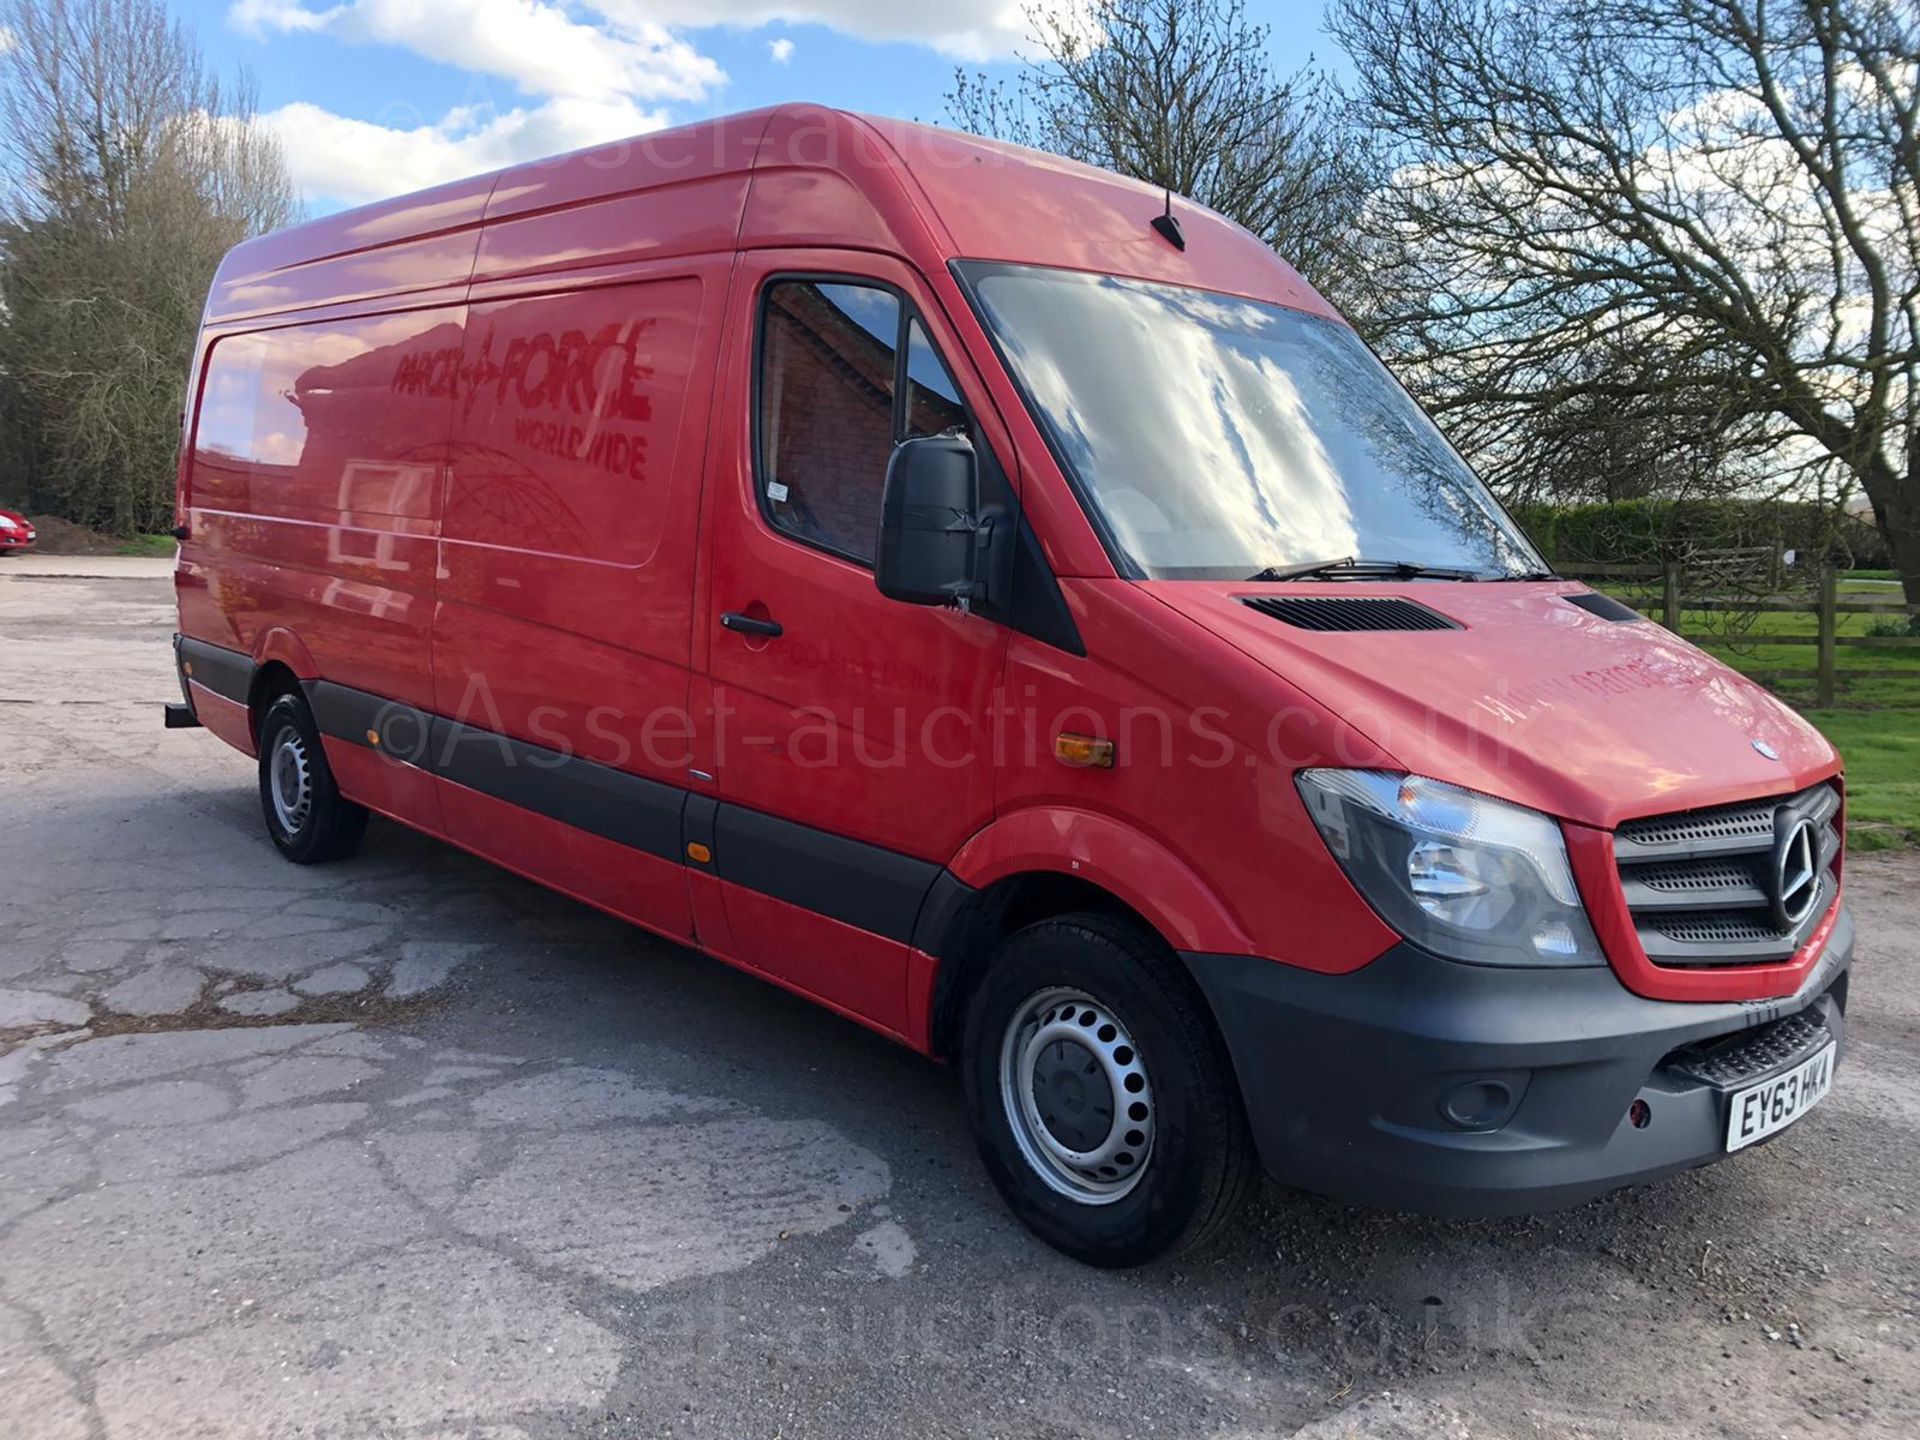 2013 MERCEDES-BENZ SPRINTER 310 CDI BLUE EFFICIENCY, DIESEL ENGINE, SHOWING 0 PREVIOUS KEEPERS - Image 2 of 24